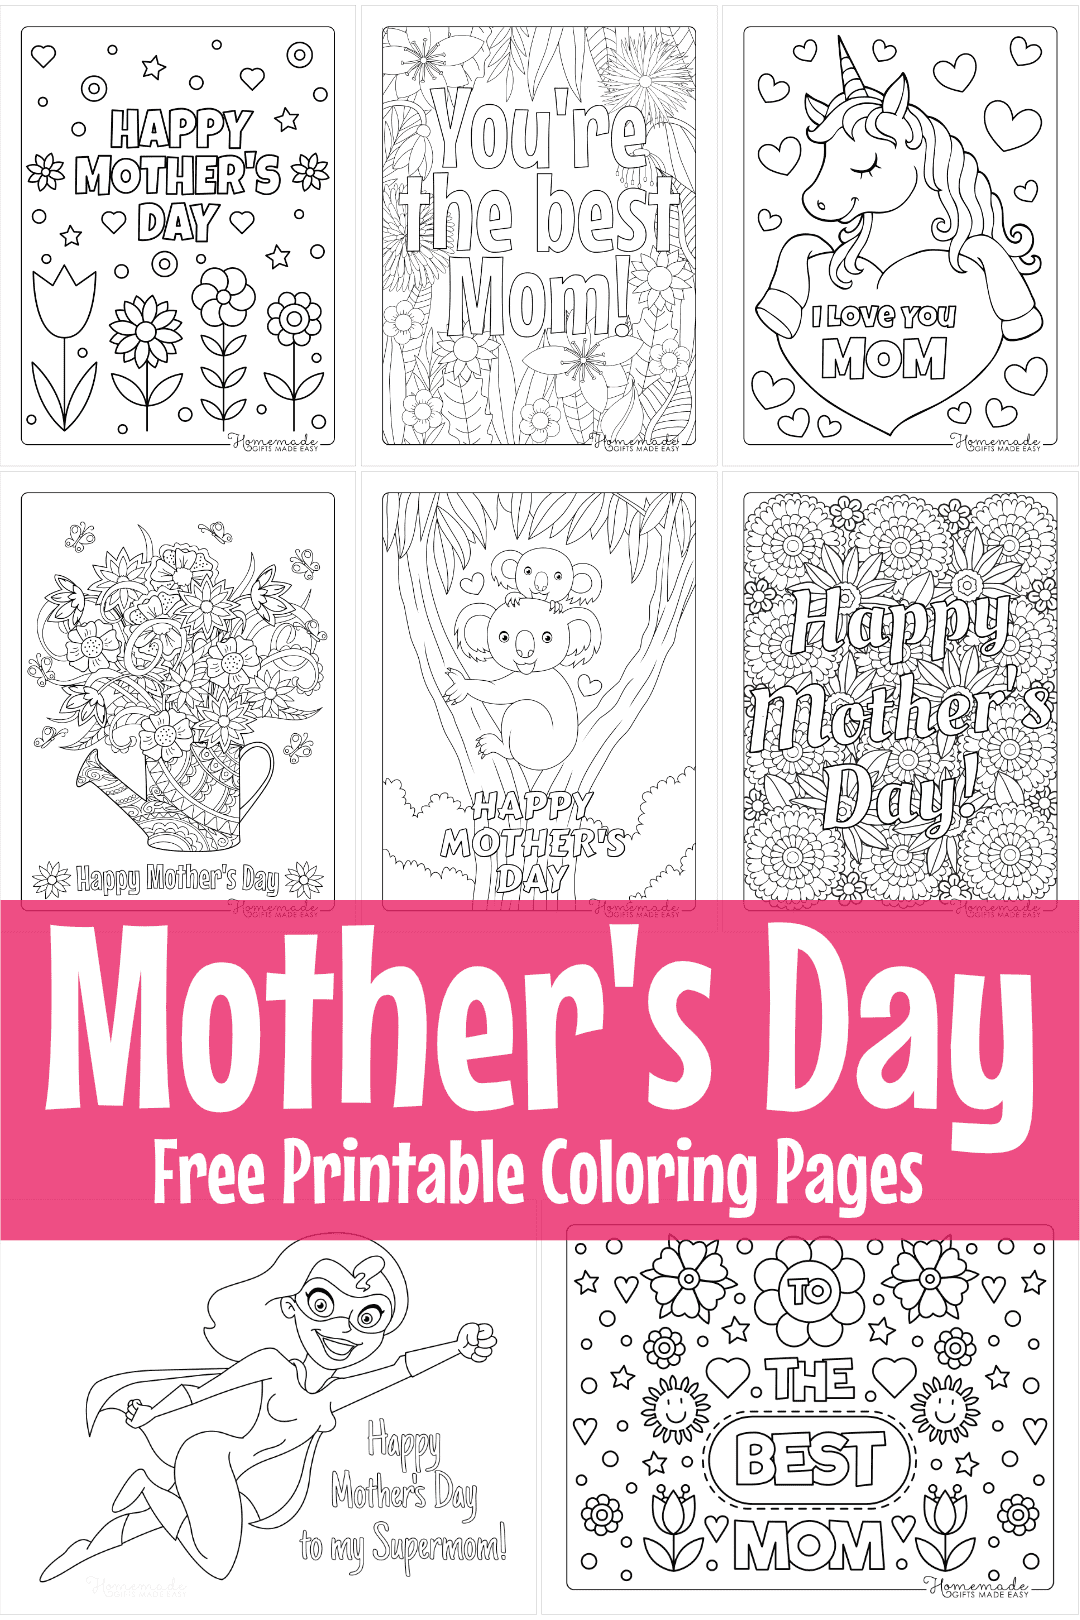 20 Best Mother's Day Coloring Pages   Free Printable PDFs